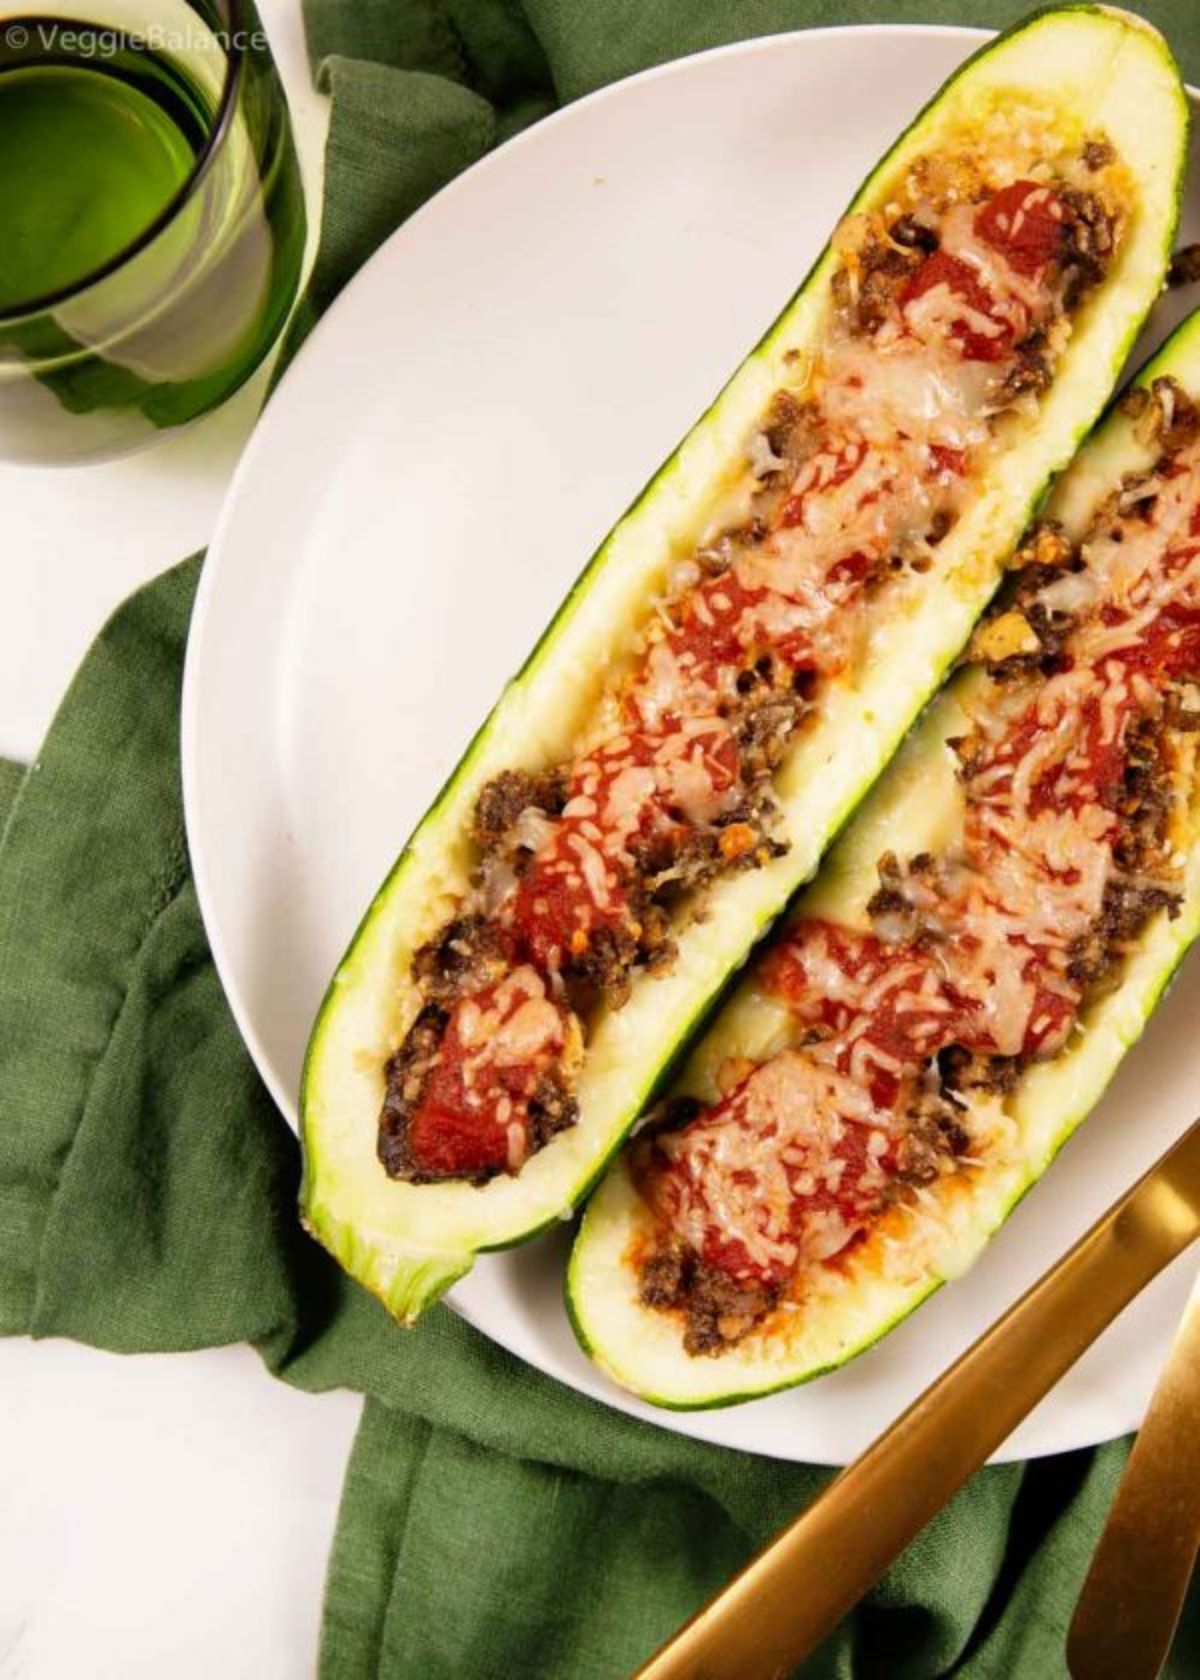 On a green cloth is a white round plate. On this are two zucchini halves stuffed with a tomato and cheese mixture. THe handles of golden cutlery can be seen to the bottom right and a glass to the top left